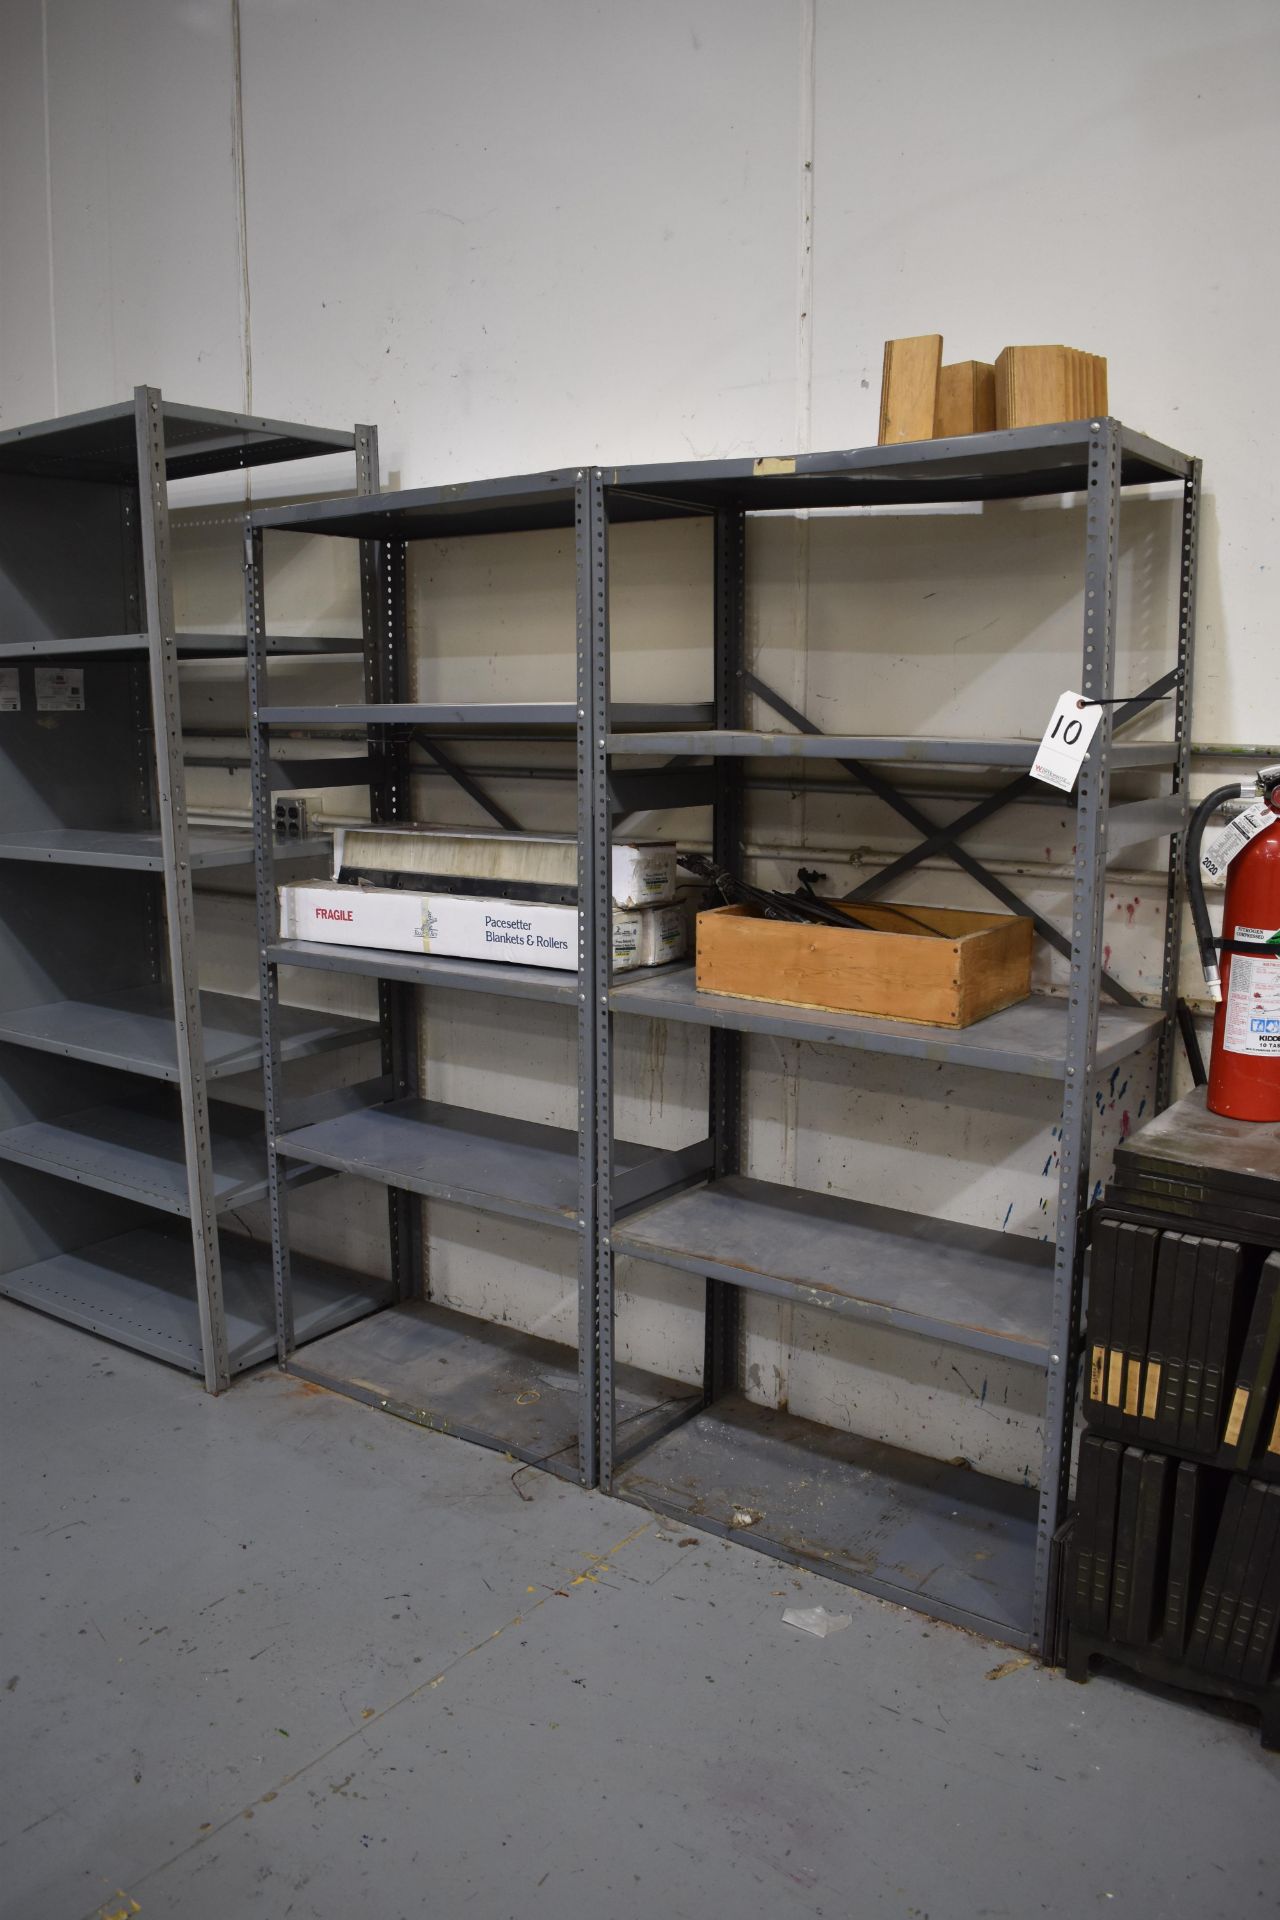 LOT (4) SECTIONS ASSORTED BOLT TOGETHER STEEL SHELVING (NO CONTENTS) - Image 2 of 2